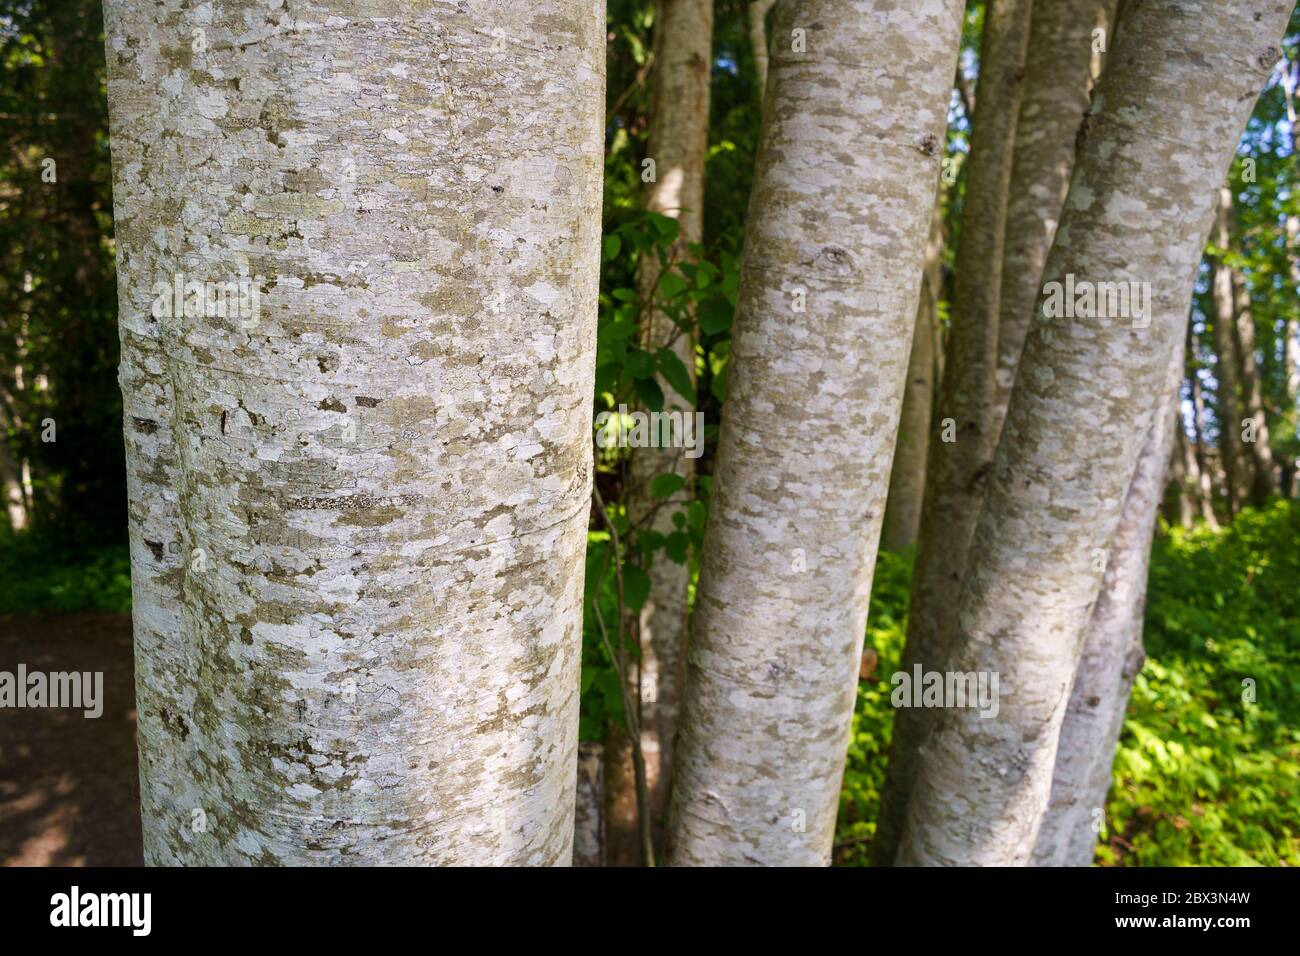 Trunks and scaly looking bark of Red Alder tree, Alnus rubra, Qualicum Beach, Vancouver Island, BC, Canada Stock Photo